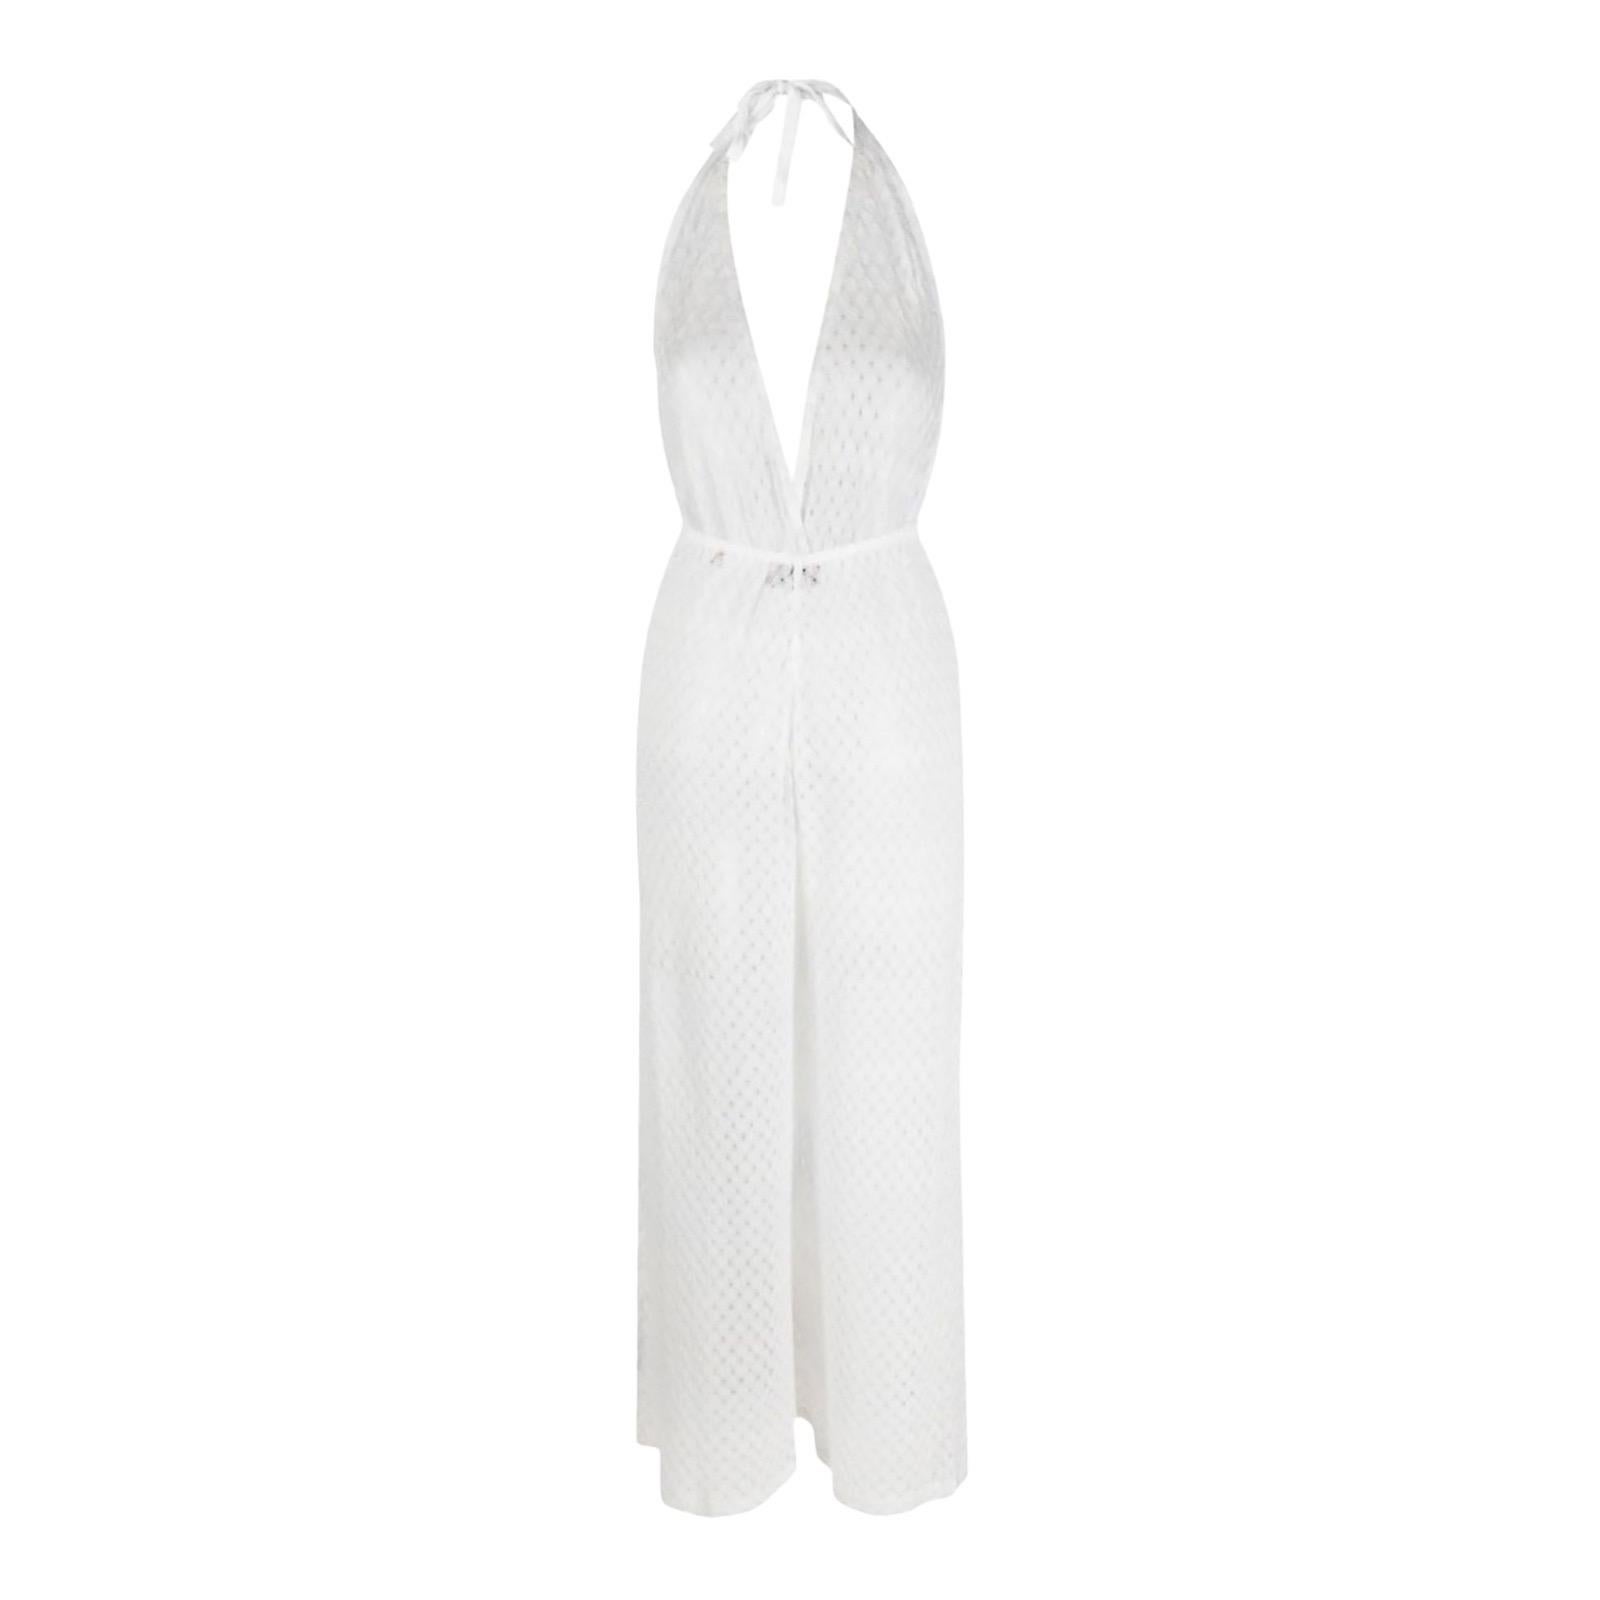 Missoni exude effortless vacation glamour. Spun from a signature zigzag knit, this white jumpsuit falls in loose legs. The elasticated waistband ensures they are easy to slip on. 



Jumpsuit with deep front neckline tied at the neck
Elasticized